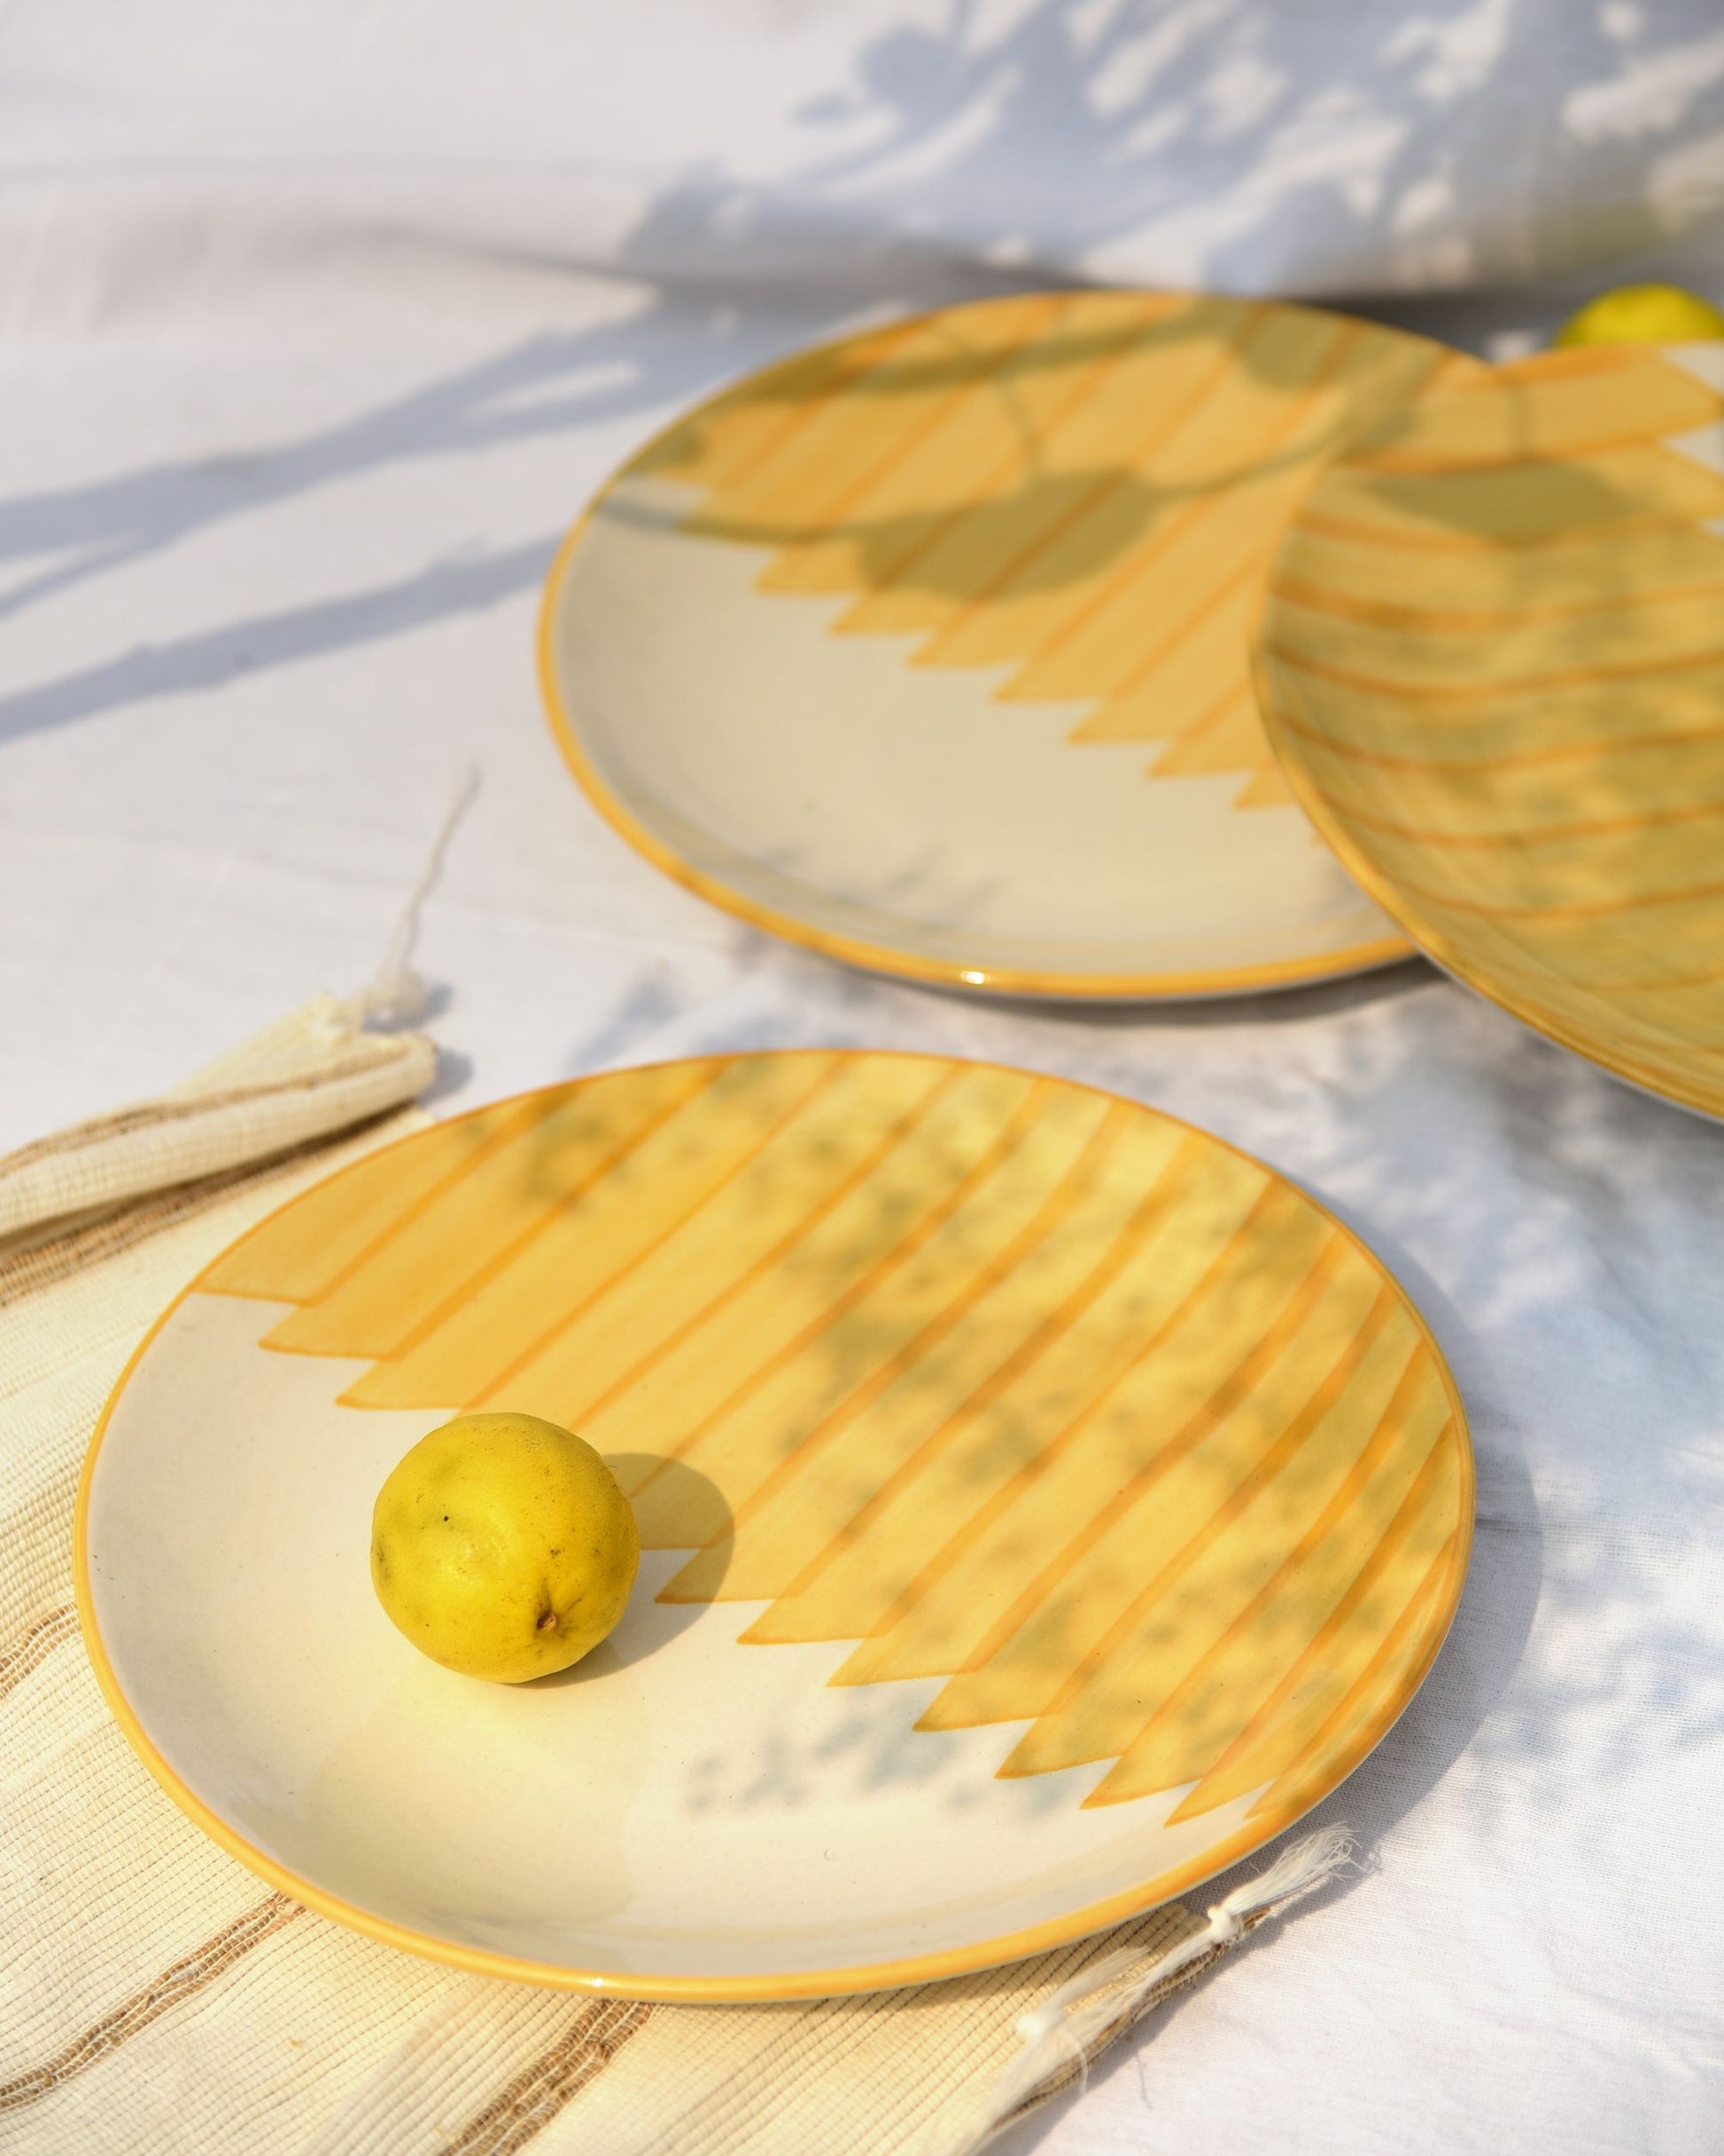  Bright yellow prints, Cheerful table setting, Durable plate set, Handcrafted plate set, Hand-painted plate set, High-quality plate set, Large dinner plate, Mesmerizing meal plate set, Positano hand-painted plate set, Radial design plate, Small batch plate set, Stylish plate set, Sunny outdoor brunch plate set, Vibrant plate set, Yellow plate set, tesu